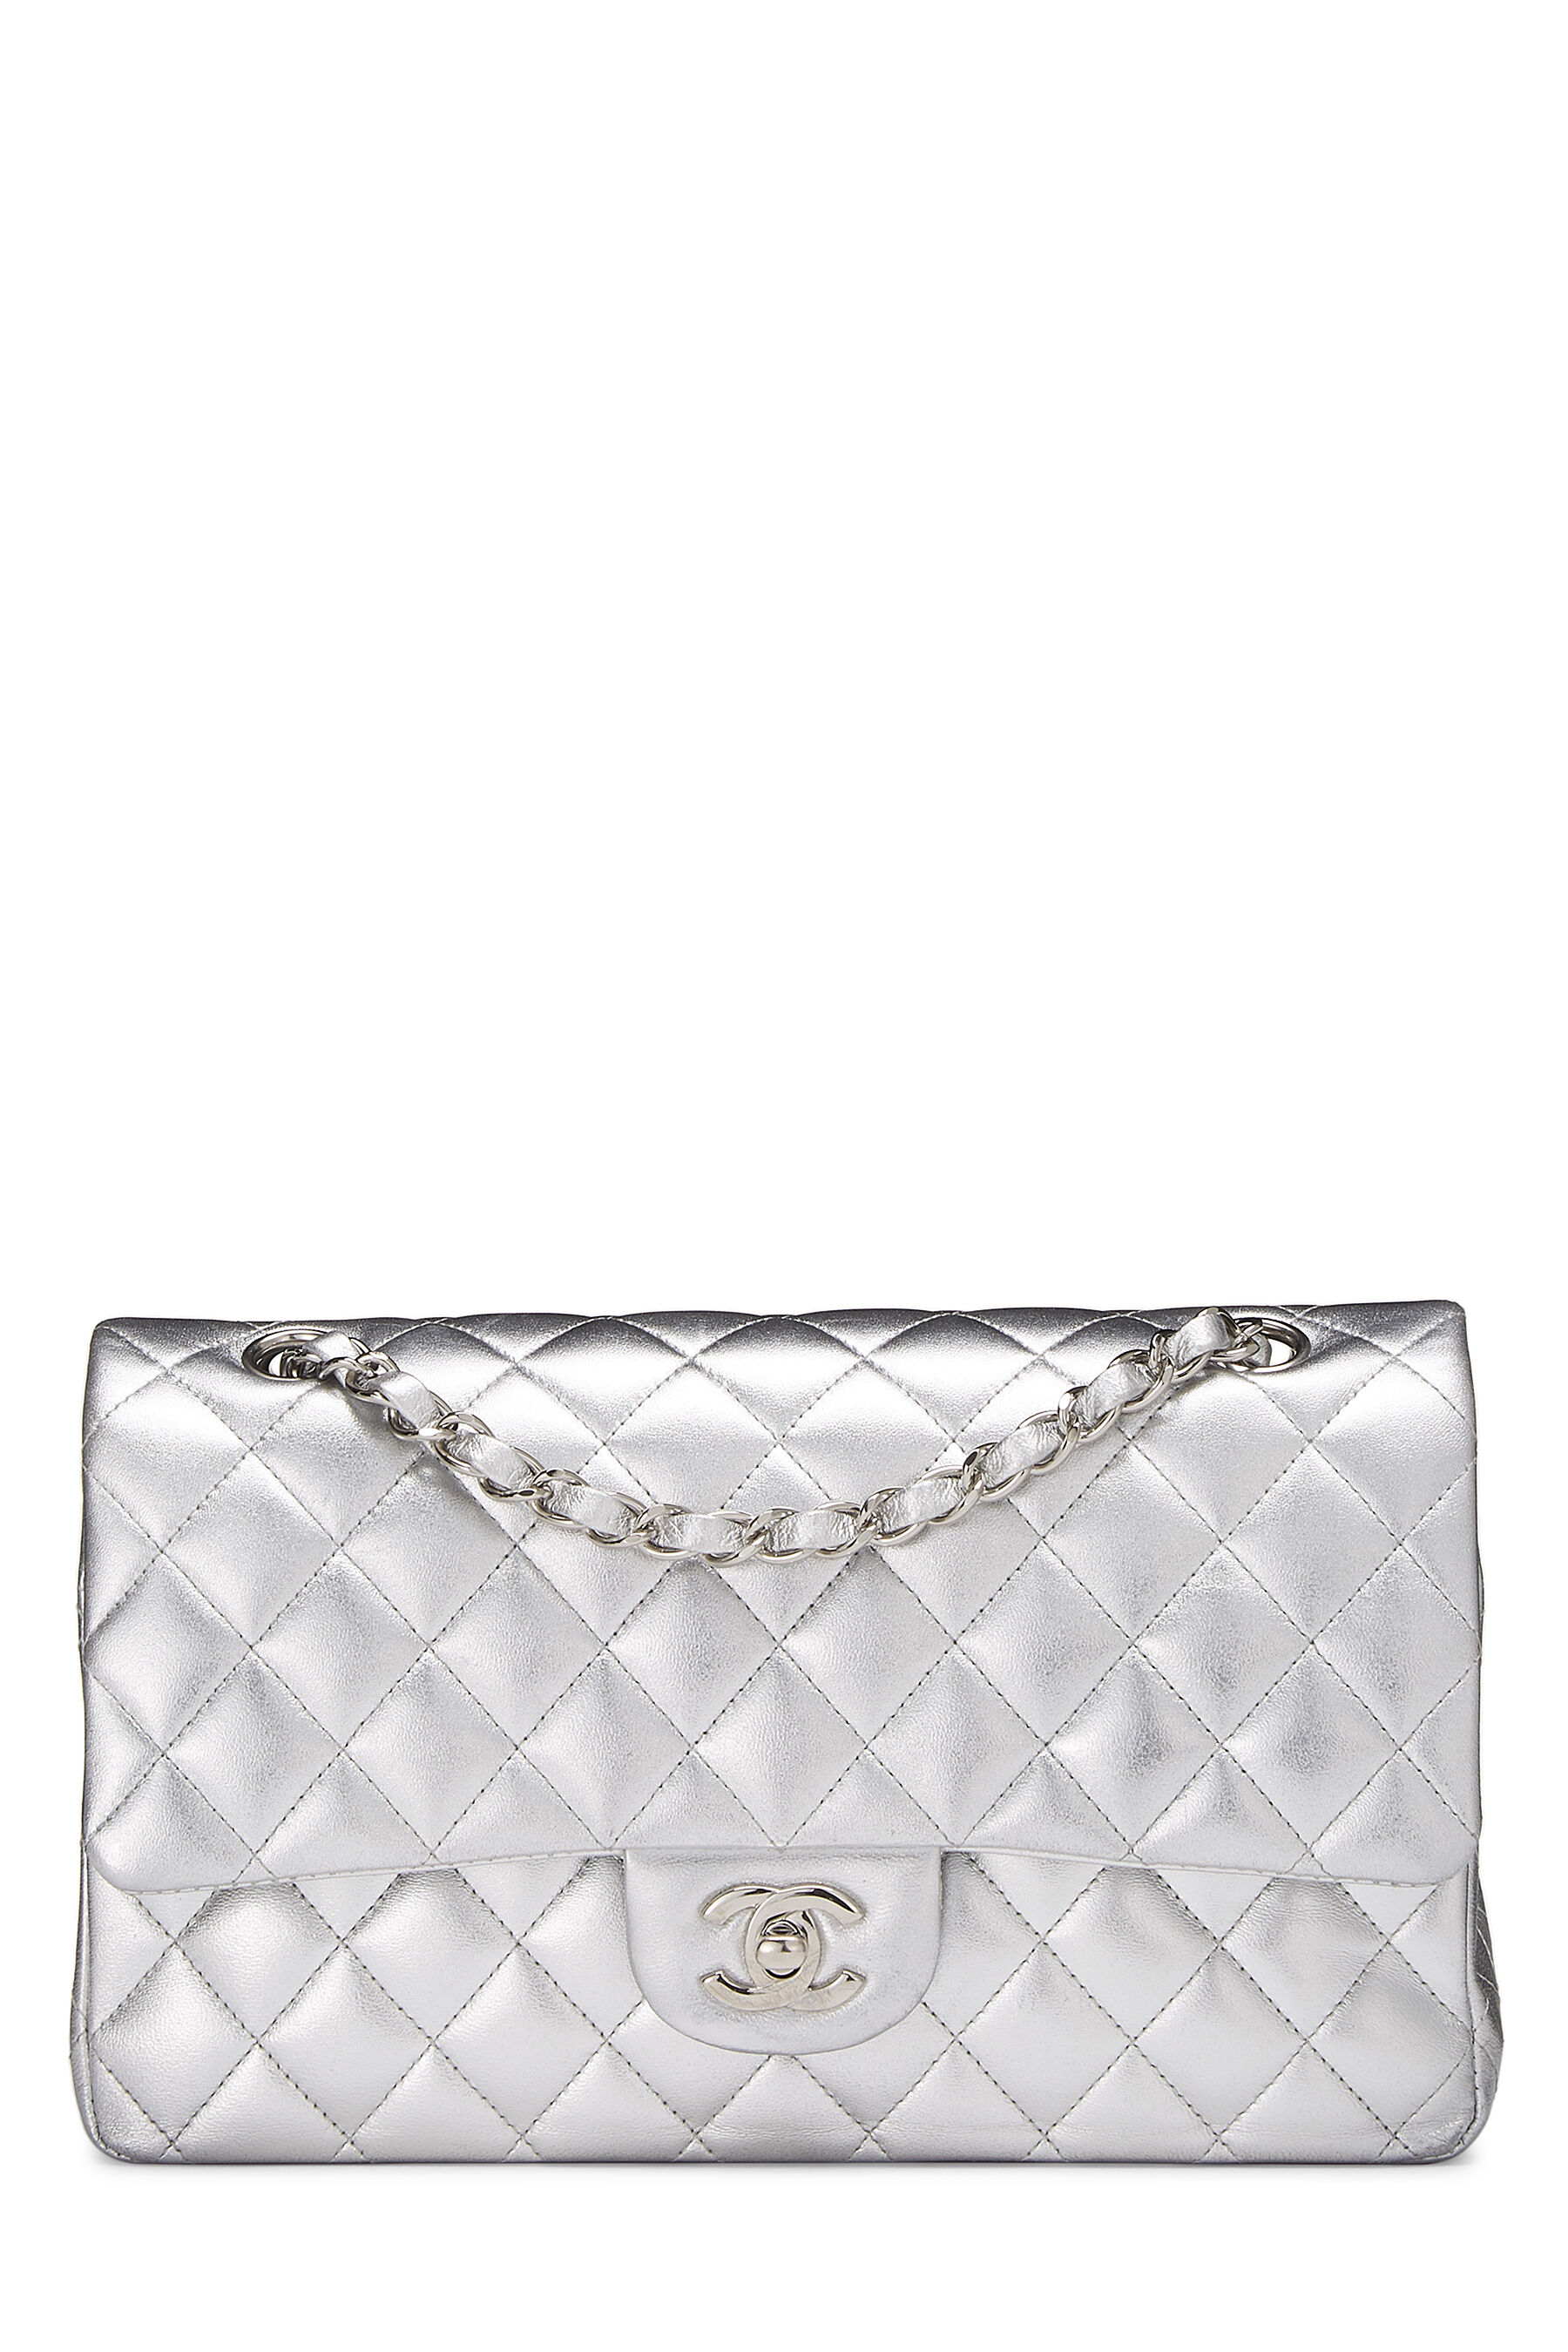 Chanel - Metallic Silver Quilted Lambskin Classic Double Flap Medium